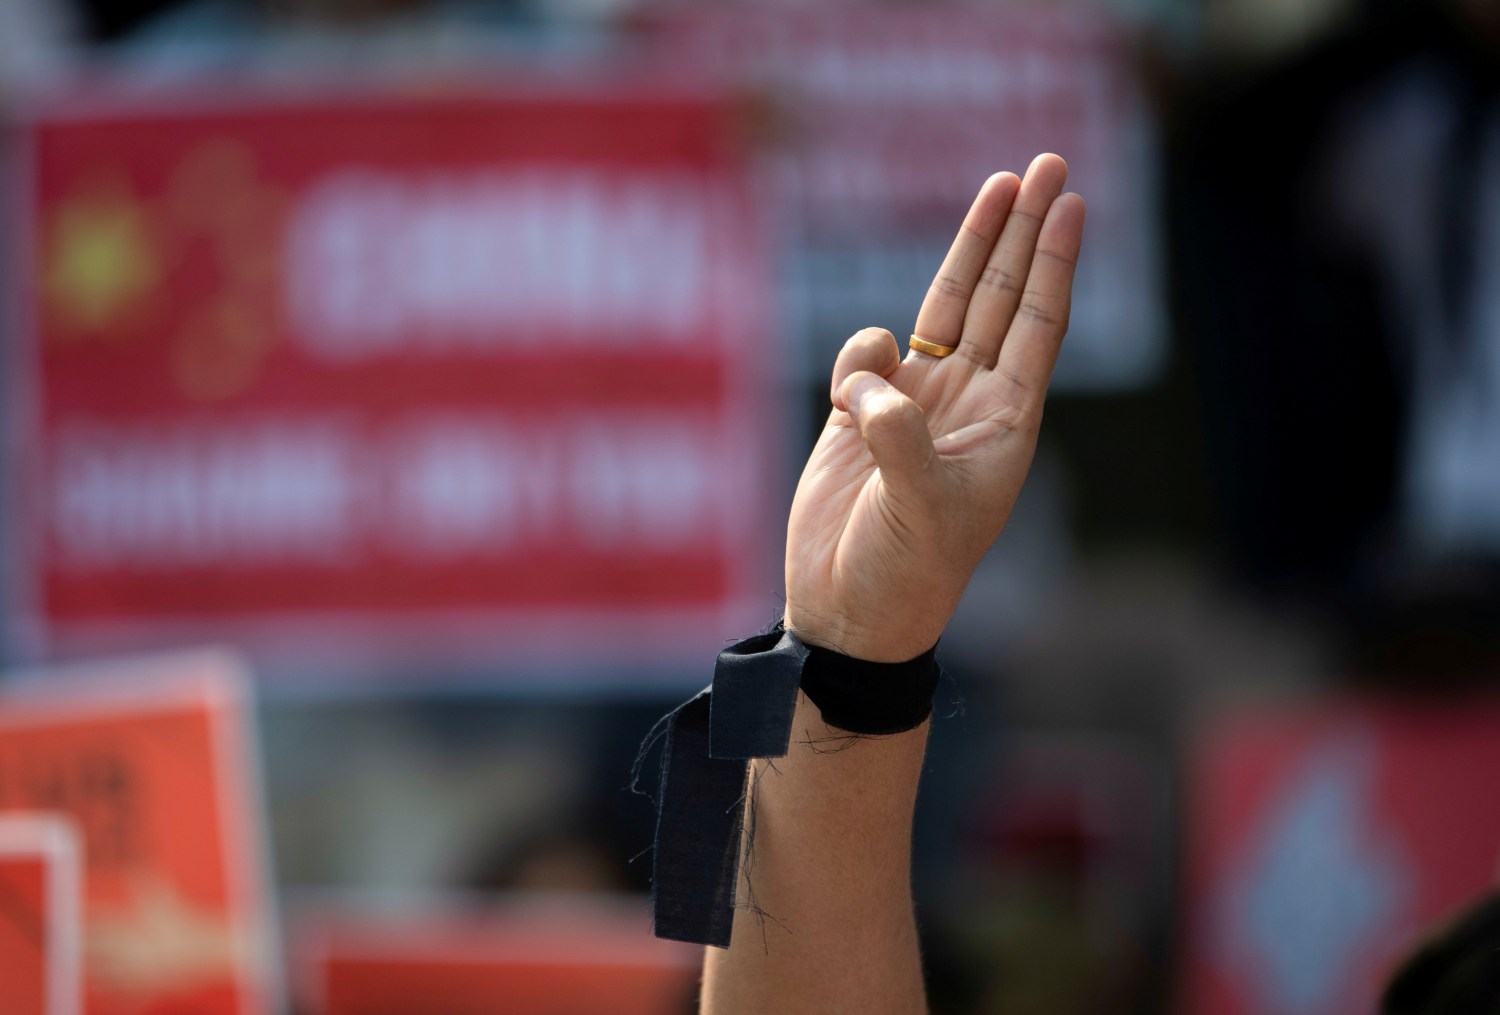 A demonstrator shows the three-finger salute during a protest against the military coup in Yangon, Myanmar, February 21, 2021. REUTERS